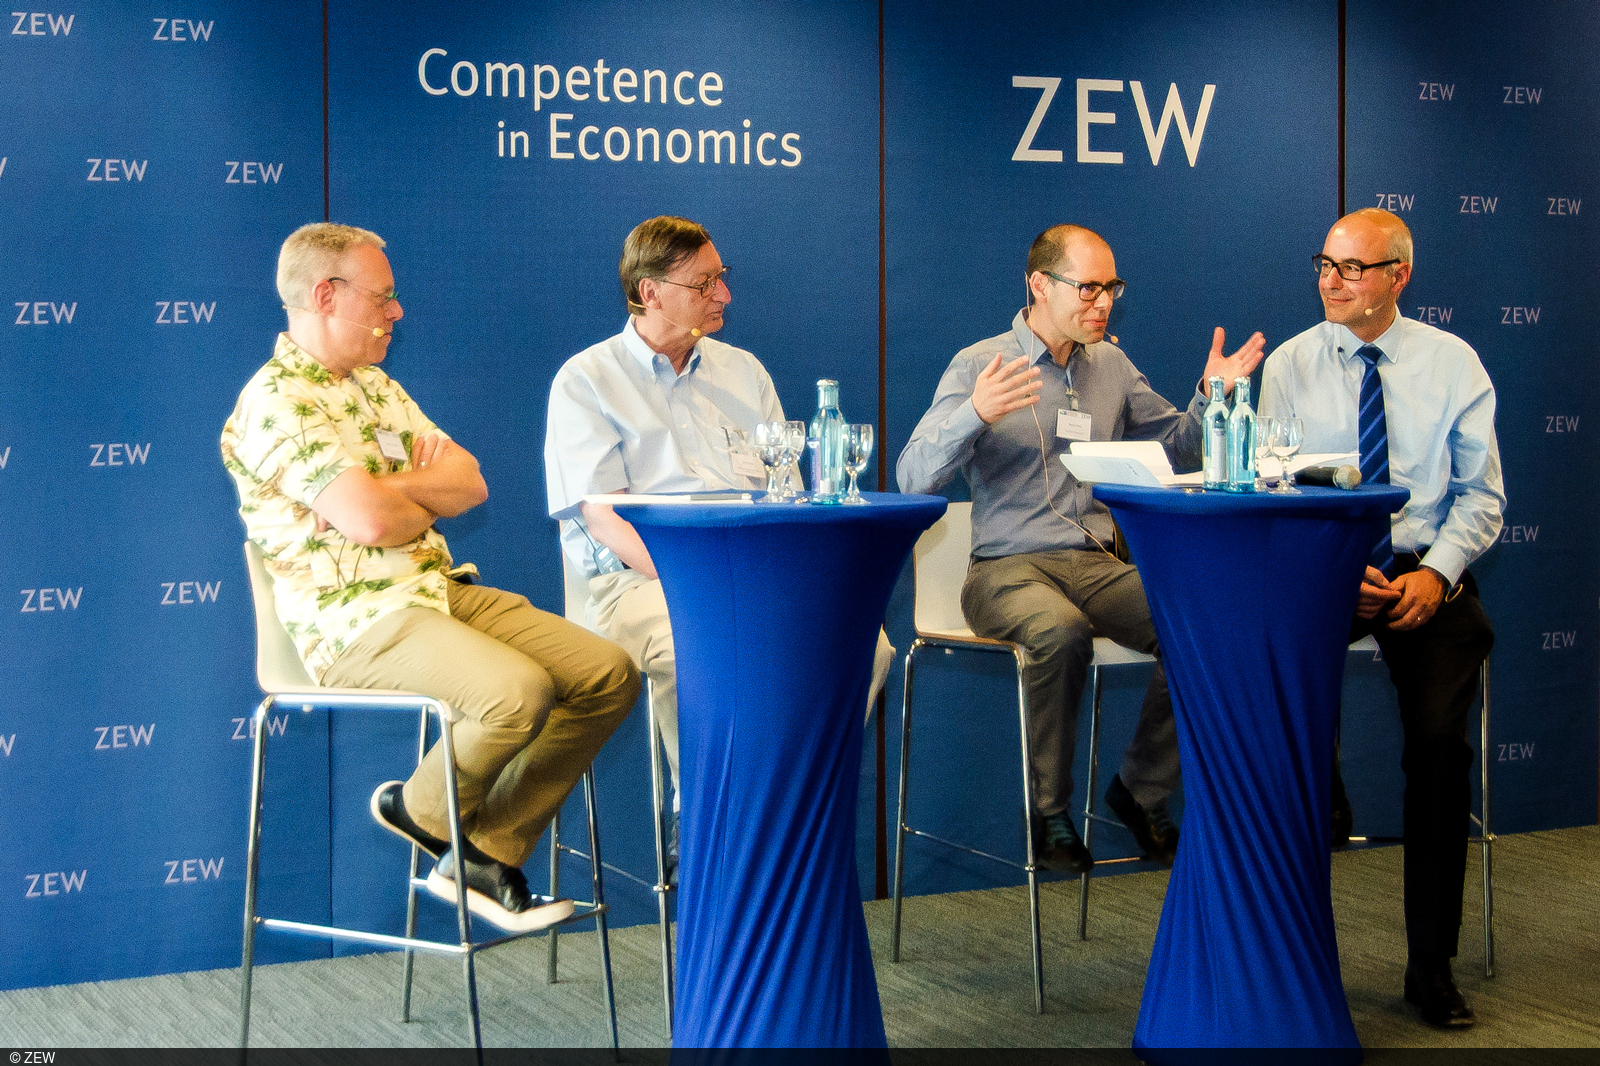 At ZEW lectures and discussions were held on the economic role of data in the future